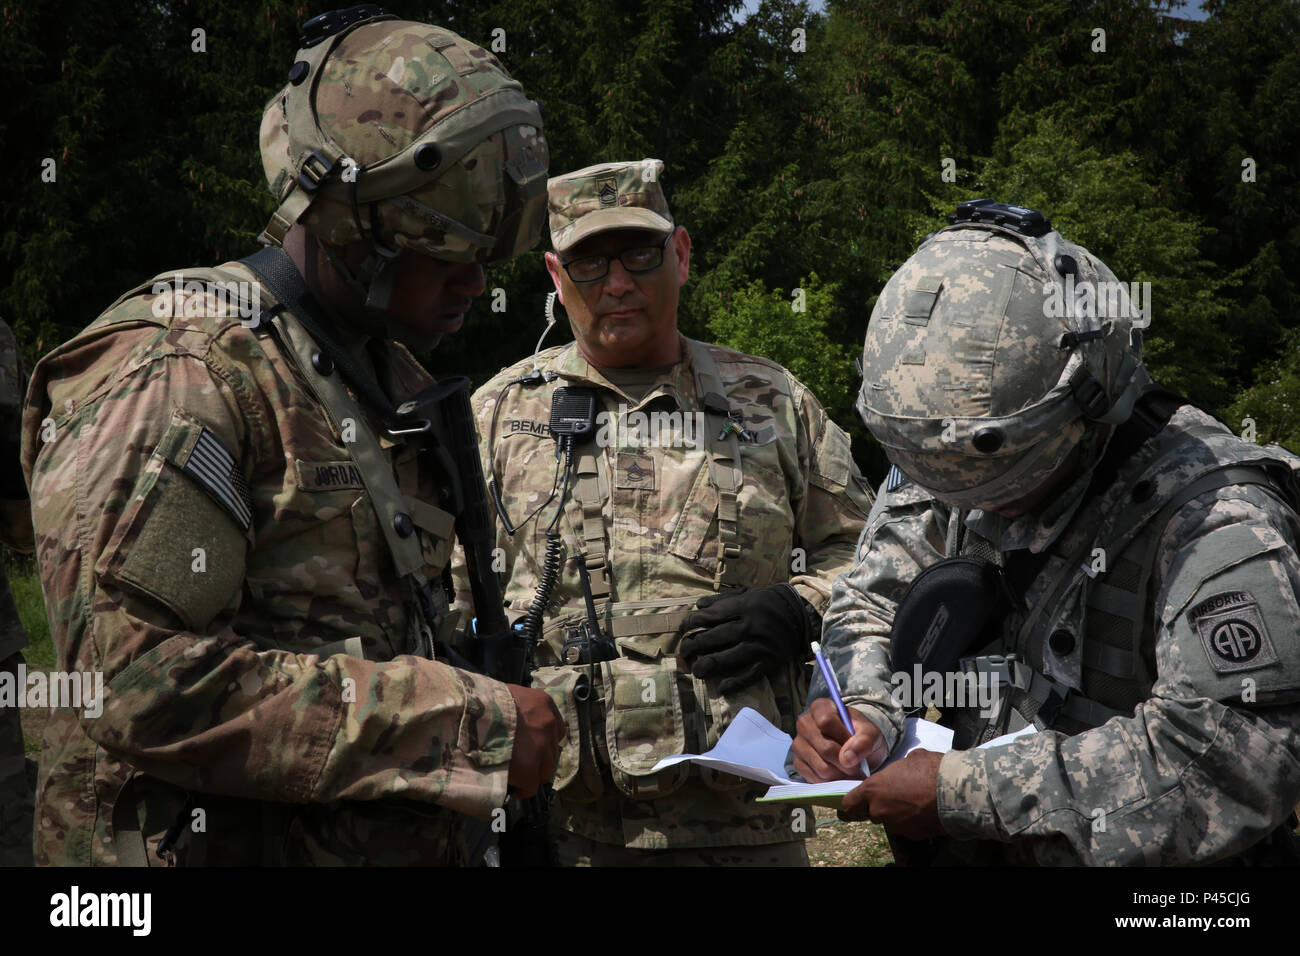 U.S. Army Sgt. 1st Class Robert R. Bemrose, center, of Joint Multinational Readiness Center (JMRC) (Operation Group) Adler Observer Coach Training monitors U.S. Soldiers of 1st Brigade Combat Team, 82nd Airborne Division discuss mission objective while conducting an AirLand operations to establish lodgement during Swift Response 16 training exercise at the Hohenfels Training Area, a part of the JMRC, in Hohenfels, Germany, Jun. 16, 2016. Exercise Swift Response is one of the premier military crisis response training events for multi-national airborne forces in the world. The exercise is design Stock Photo